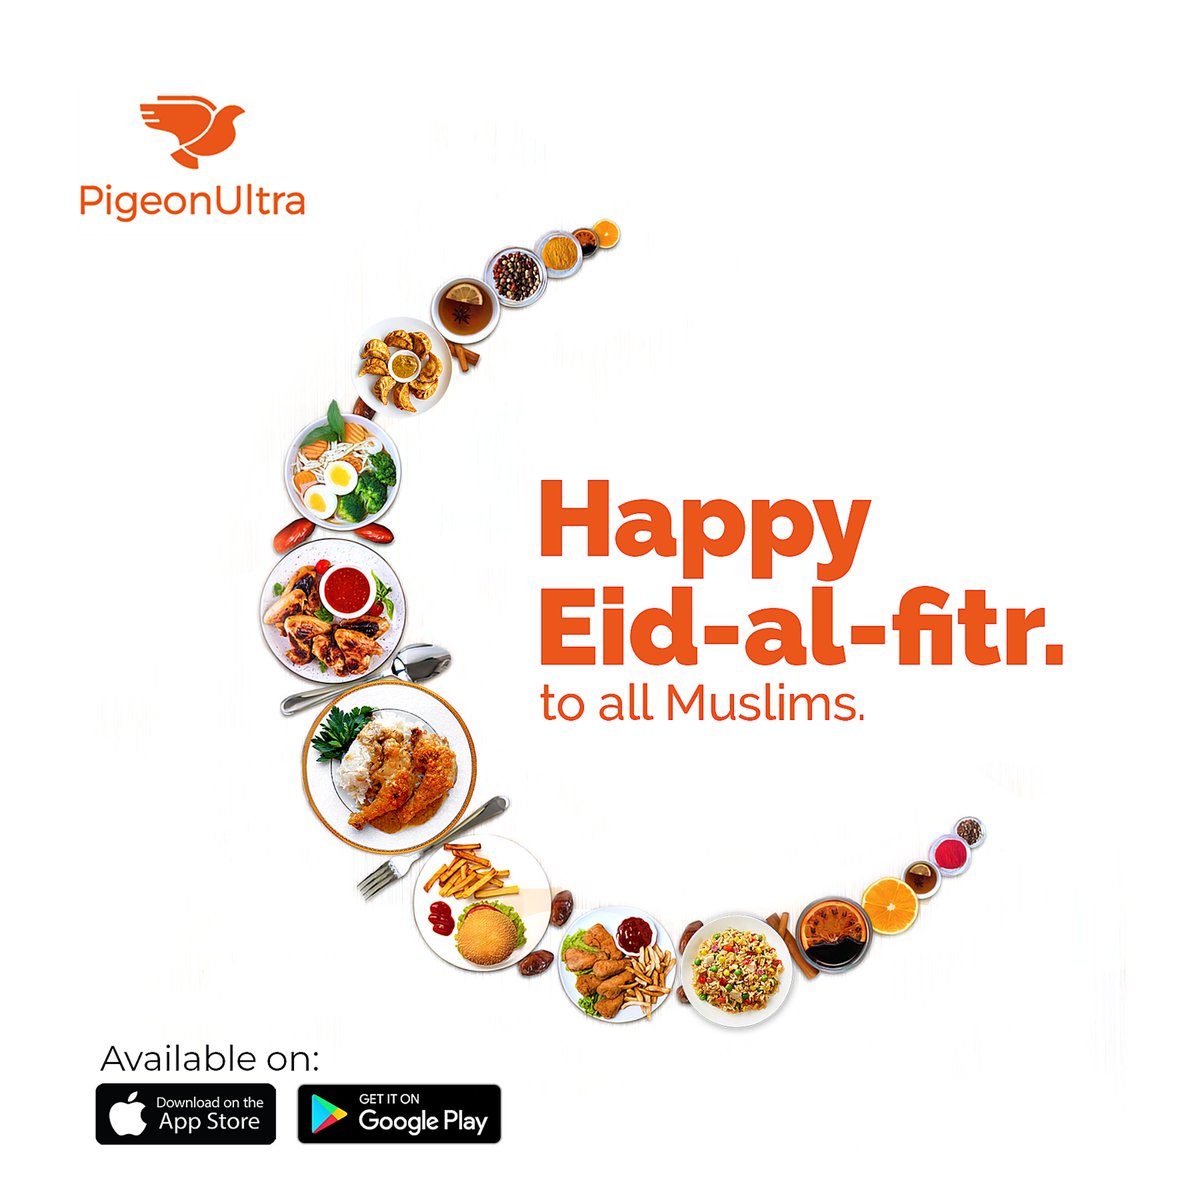 Celebrate Eid with a feast of delicious food! May this special day bring joy and blessings to your life. #EidMubarak

#pigeonUltra #pigeonultraapp #delivery #fooddelivery #ghanafoods #accra #ghanamade #ghanafoodie #pigeonIT